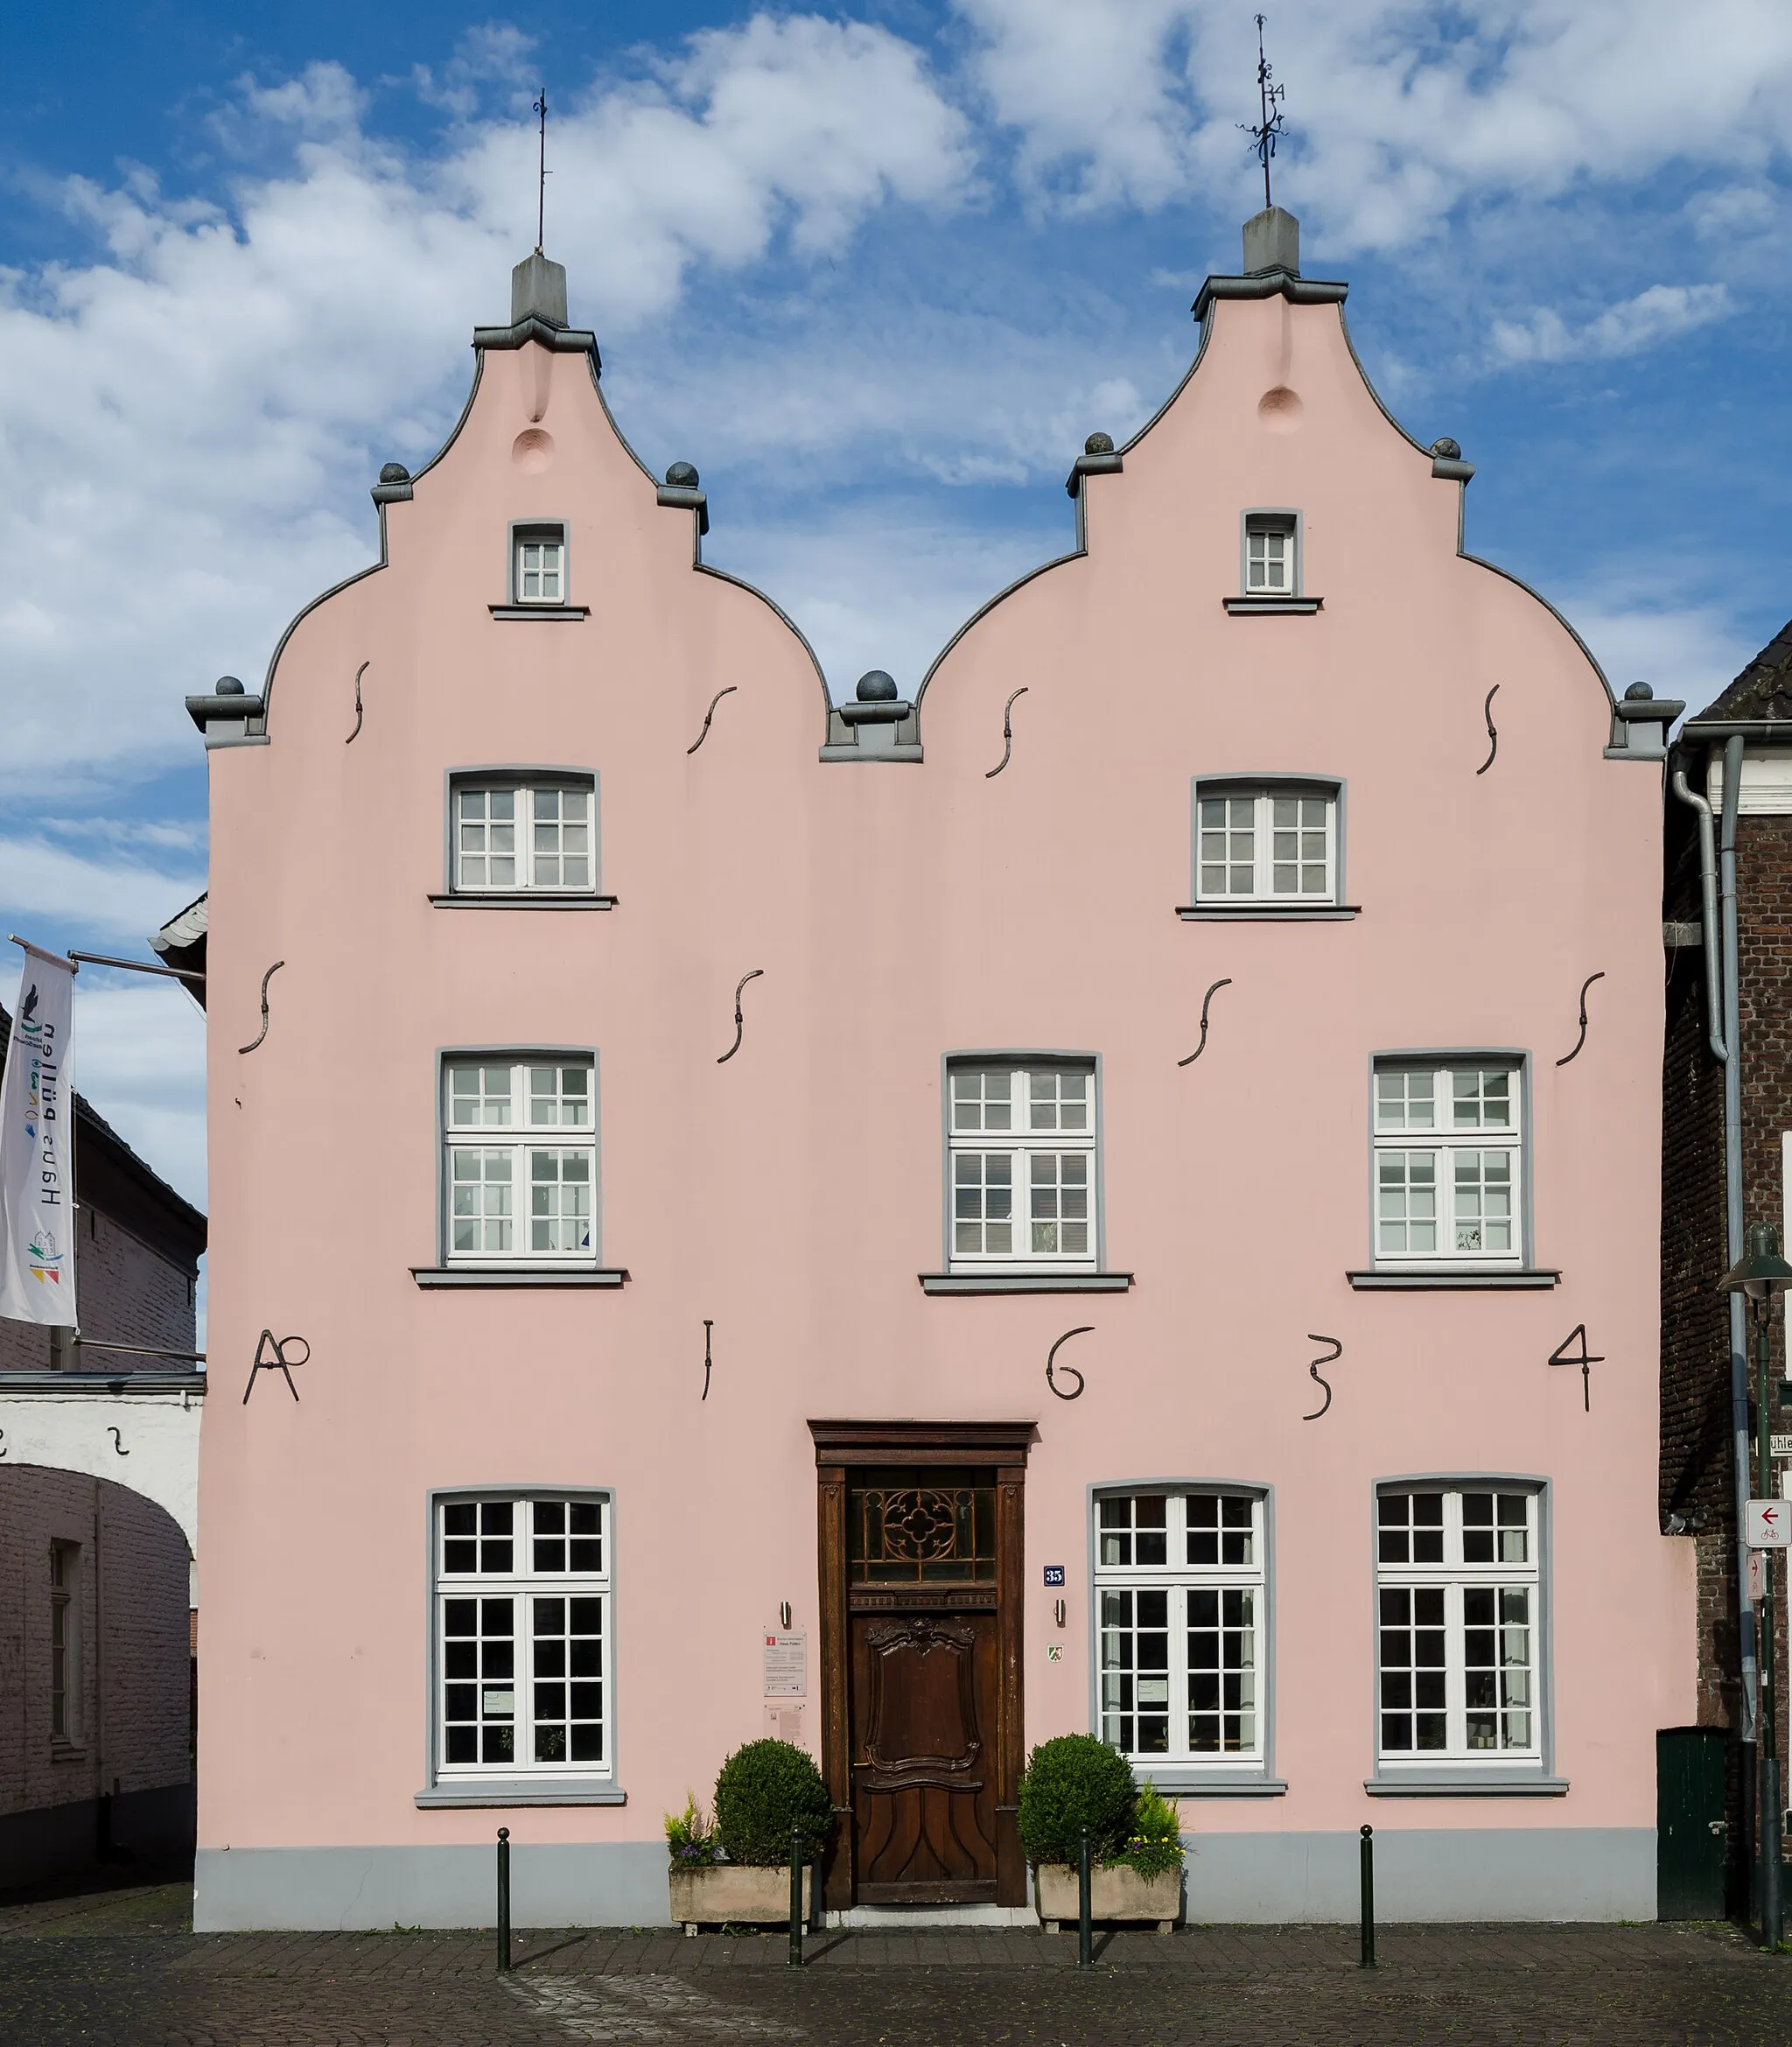 Photo showing: Puellen House, old building in Wachtendonk, Germany